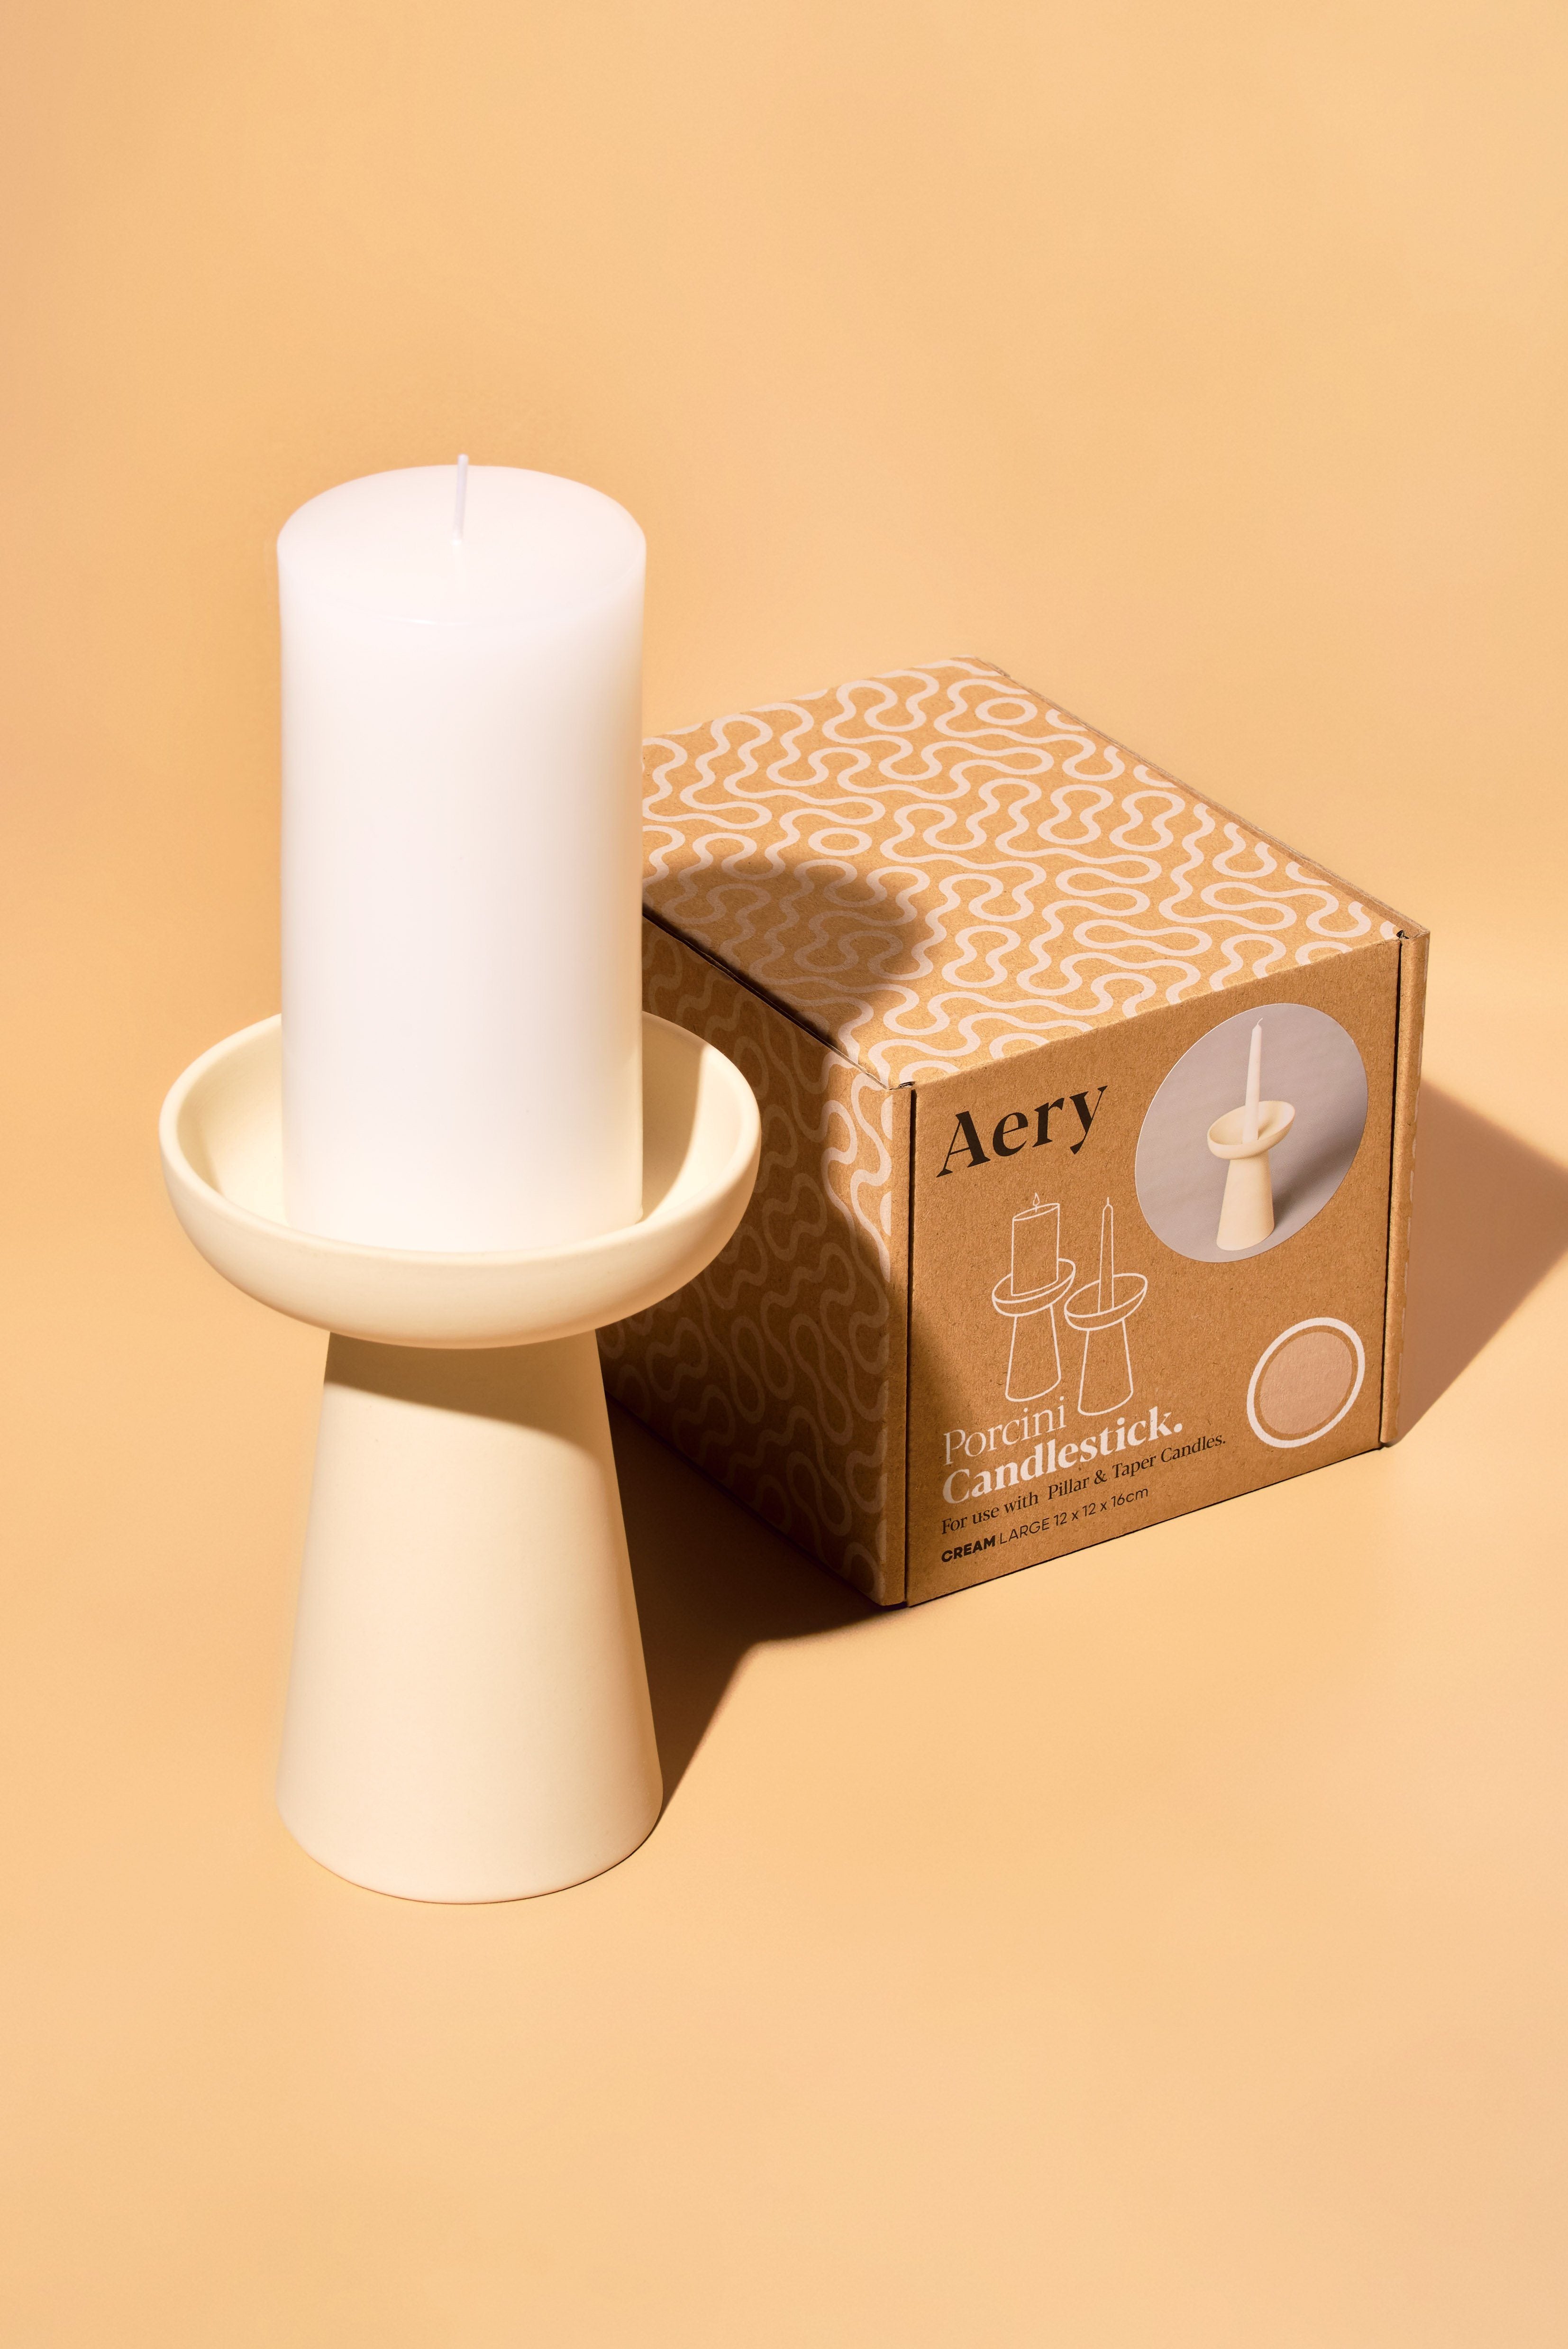 aery living tall cream ceramic candle holder displayed with white pillar candle and product packaging against an orange background